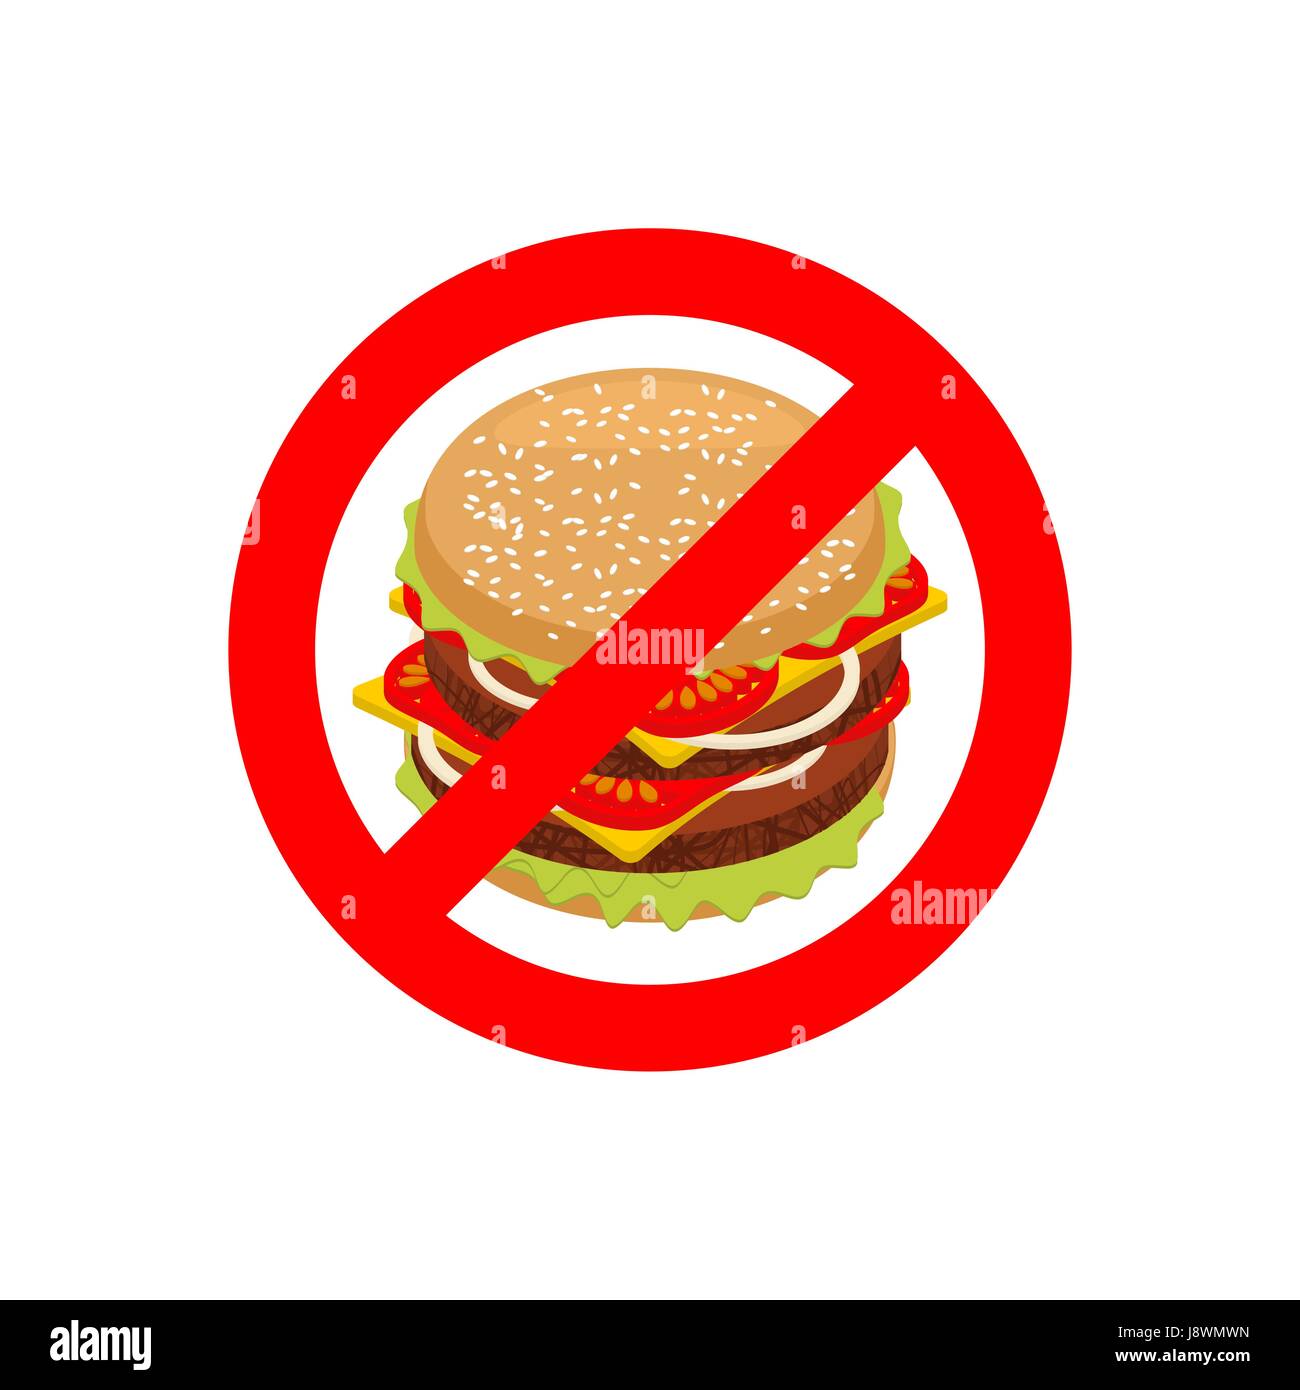 Ban hamburger. Stop fast food. Strikethrough juicy burger with cutlets. Emblem against unhealthy food. Red prohibition sign. Forbidden harmful food Stock Vector